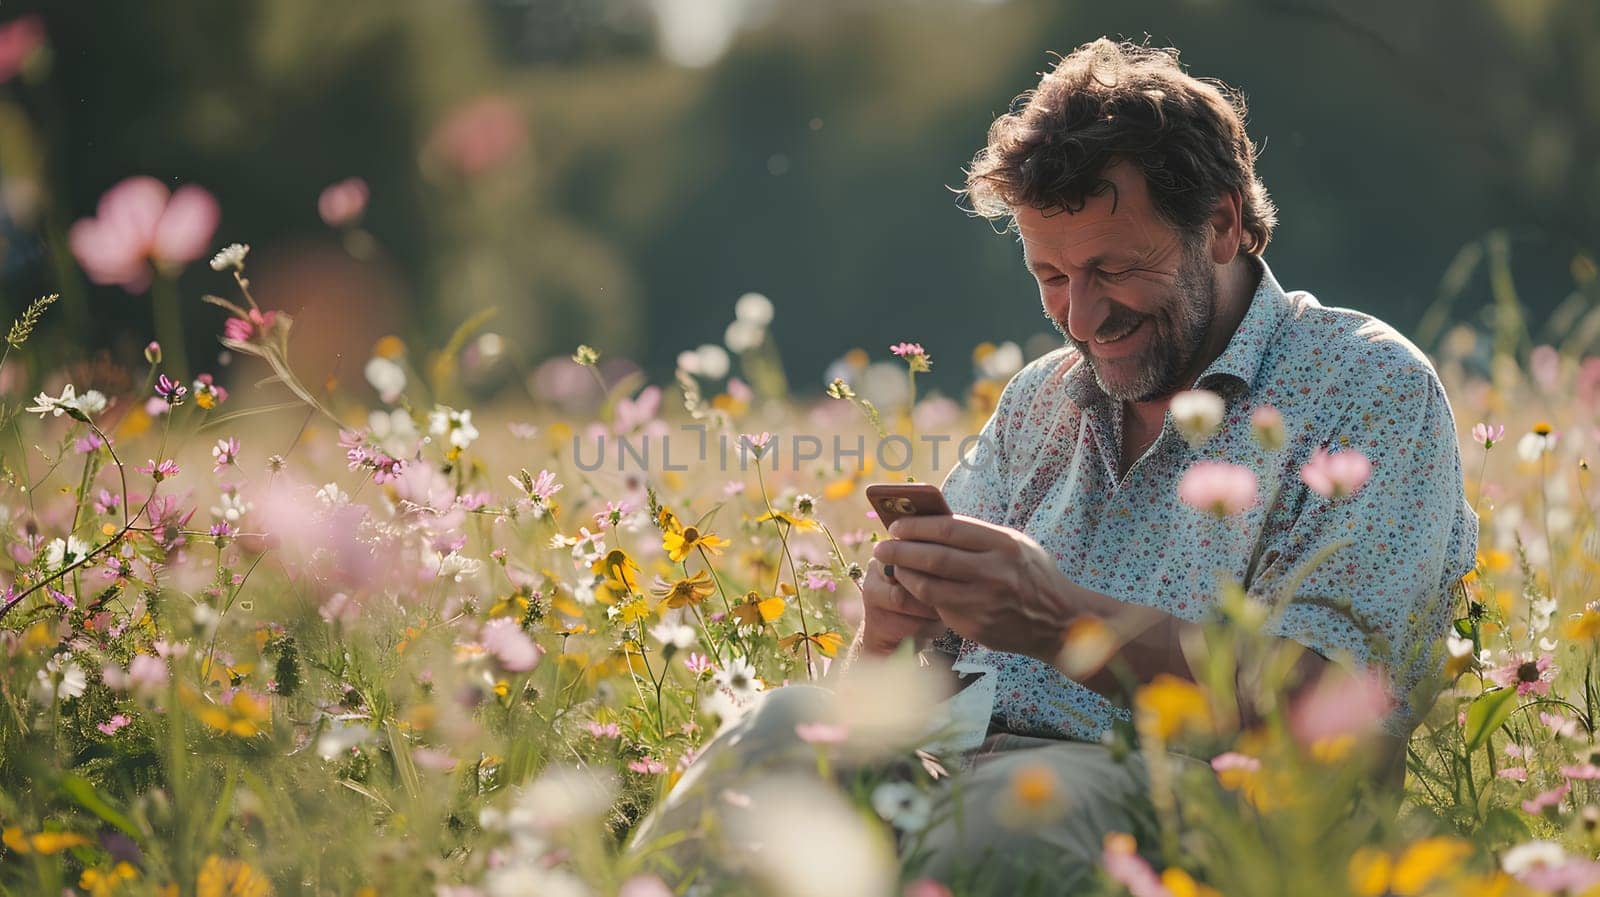 A man sits in a meadow of flowers, surrounded by a natural landscape of grass and flowering plants, while happily looking at his cell phone